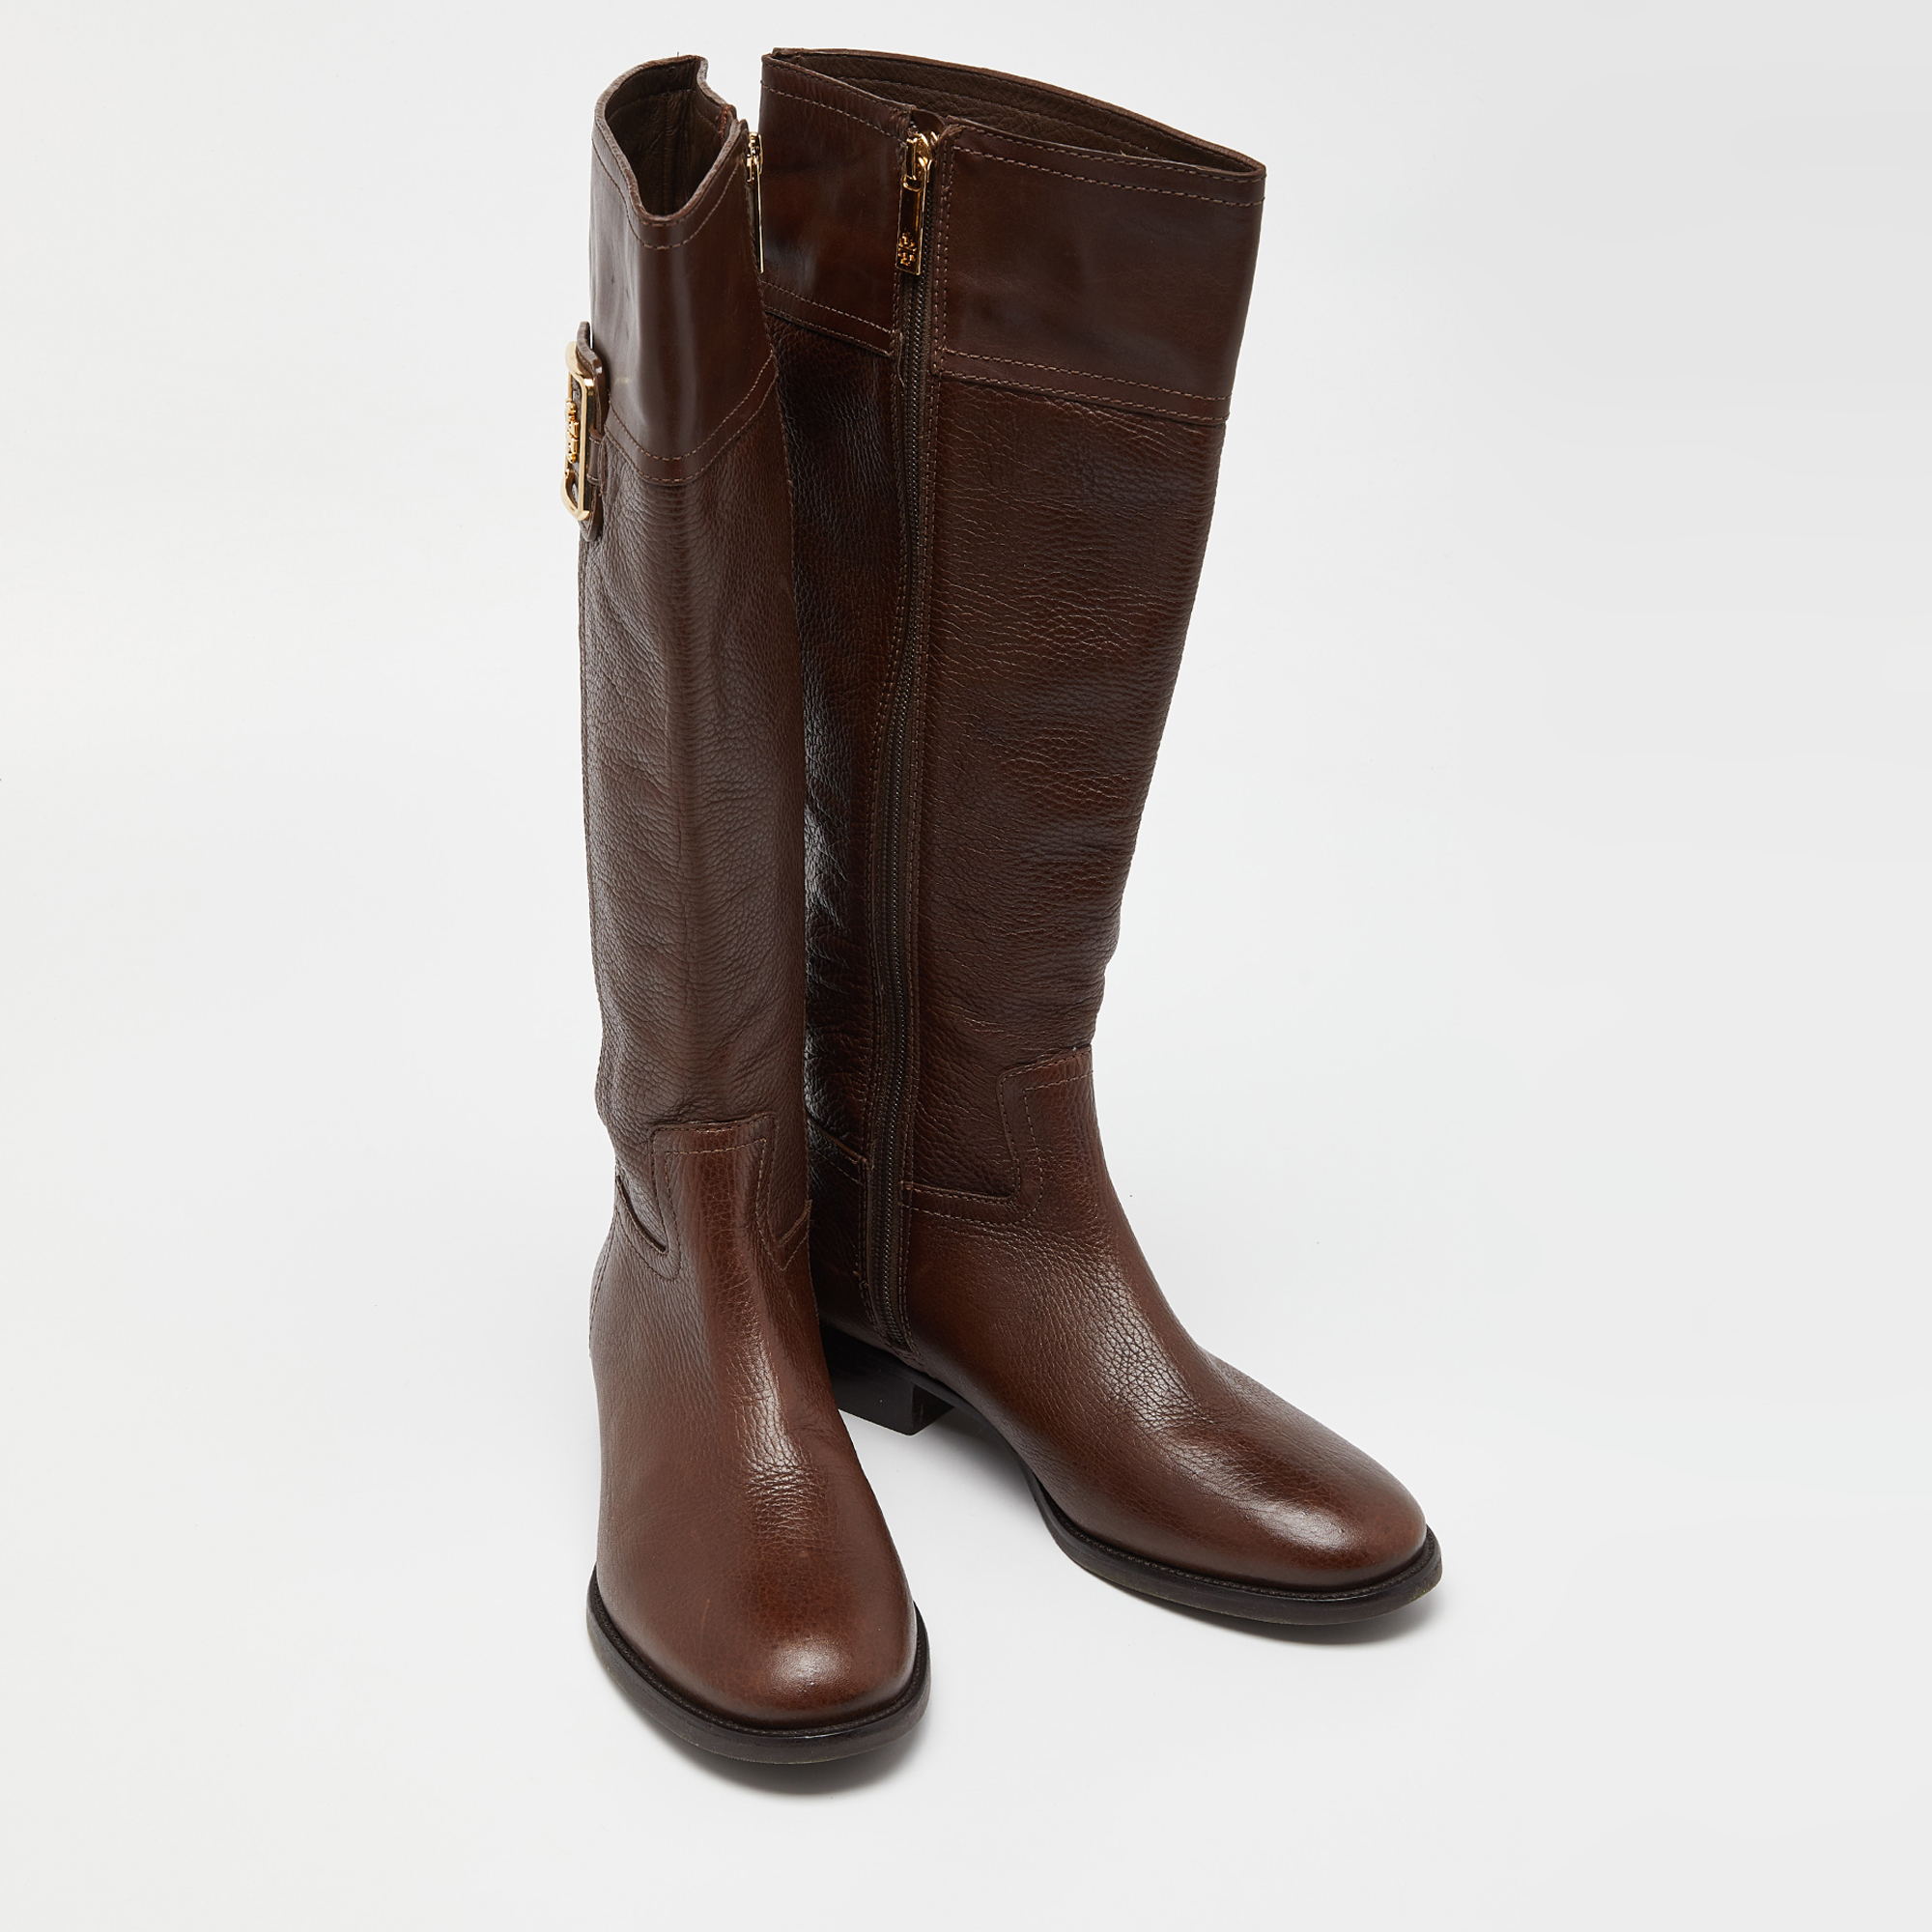 Tory Burch Brown Leather Knee Length Boots Size 39